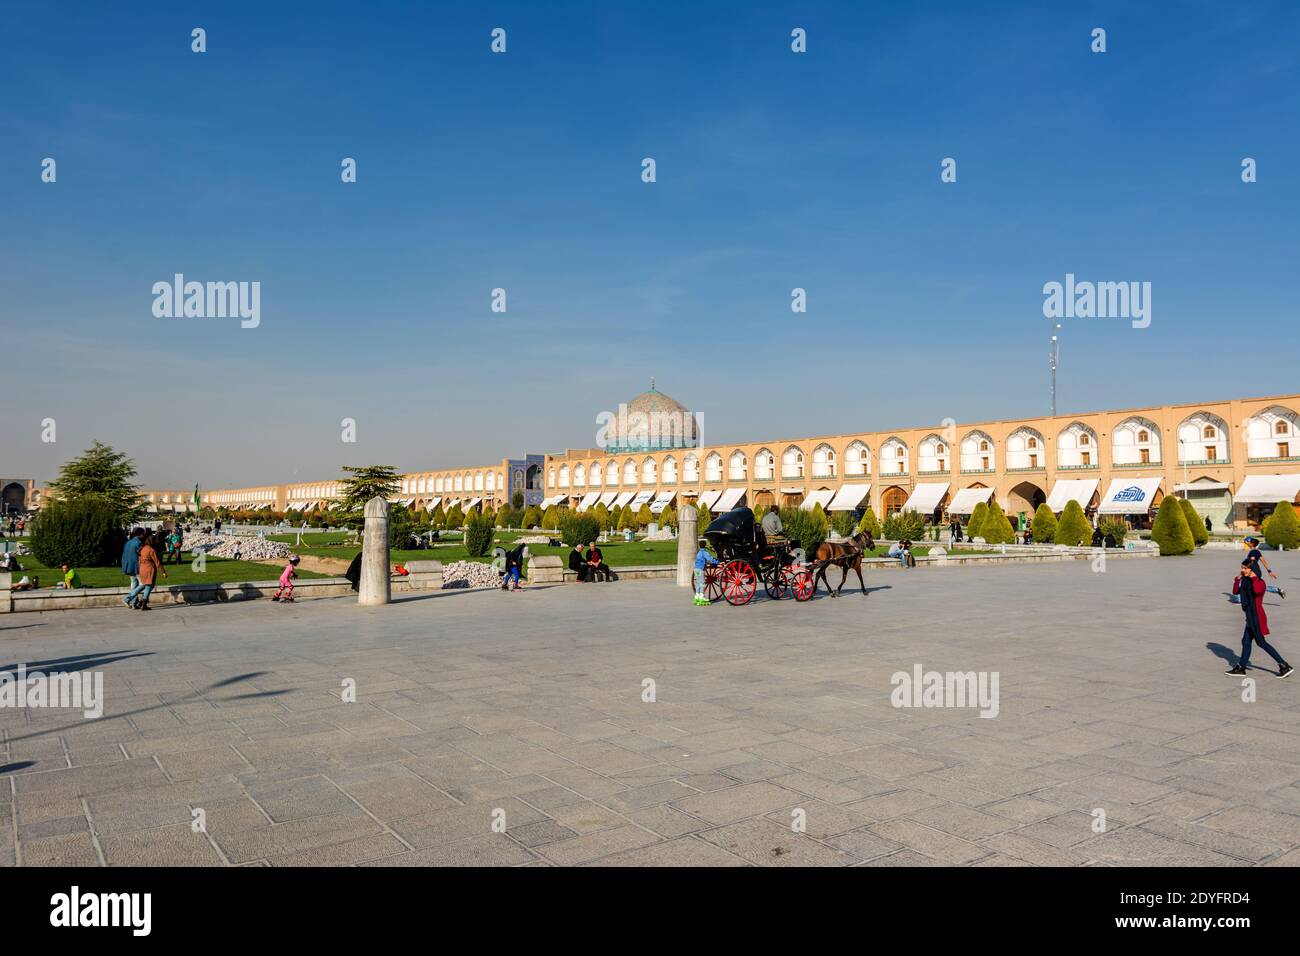 Eastside with Sheikh Lotfollah Mosque, in the Naqsh-e Jahan Square, an important historical site, and one of UNESCO's World Heritage Sites Stock Photo